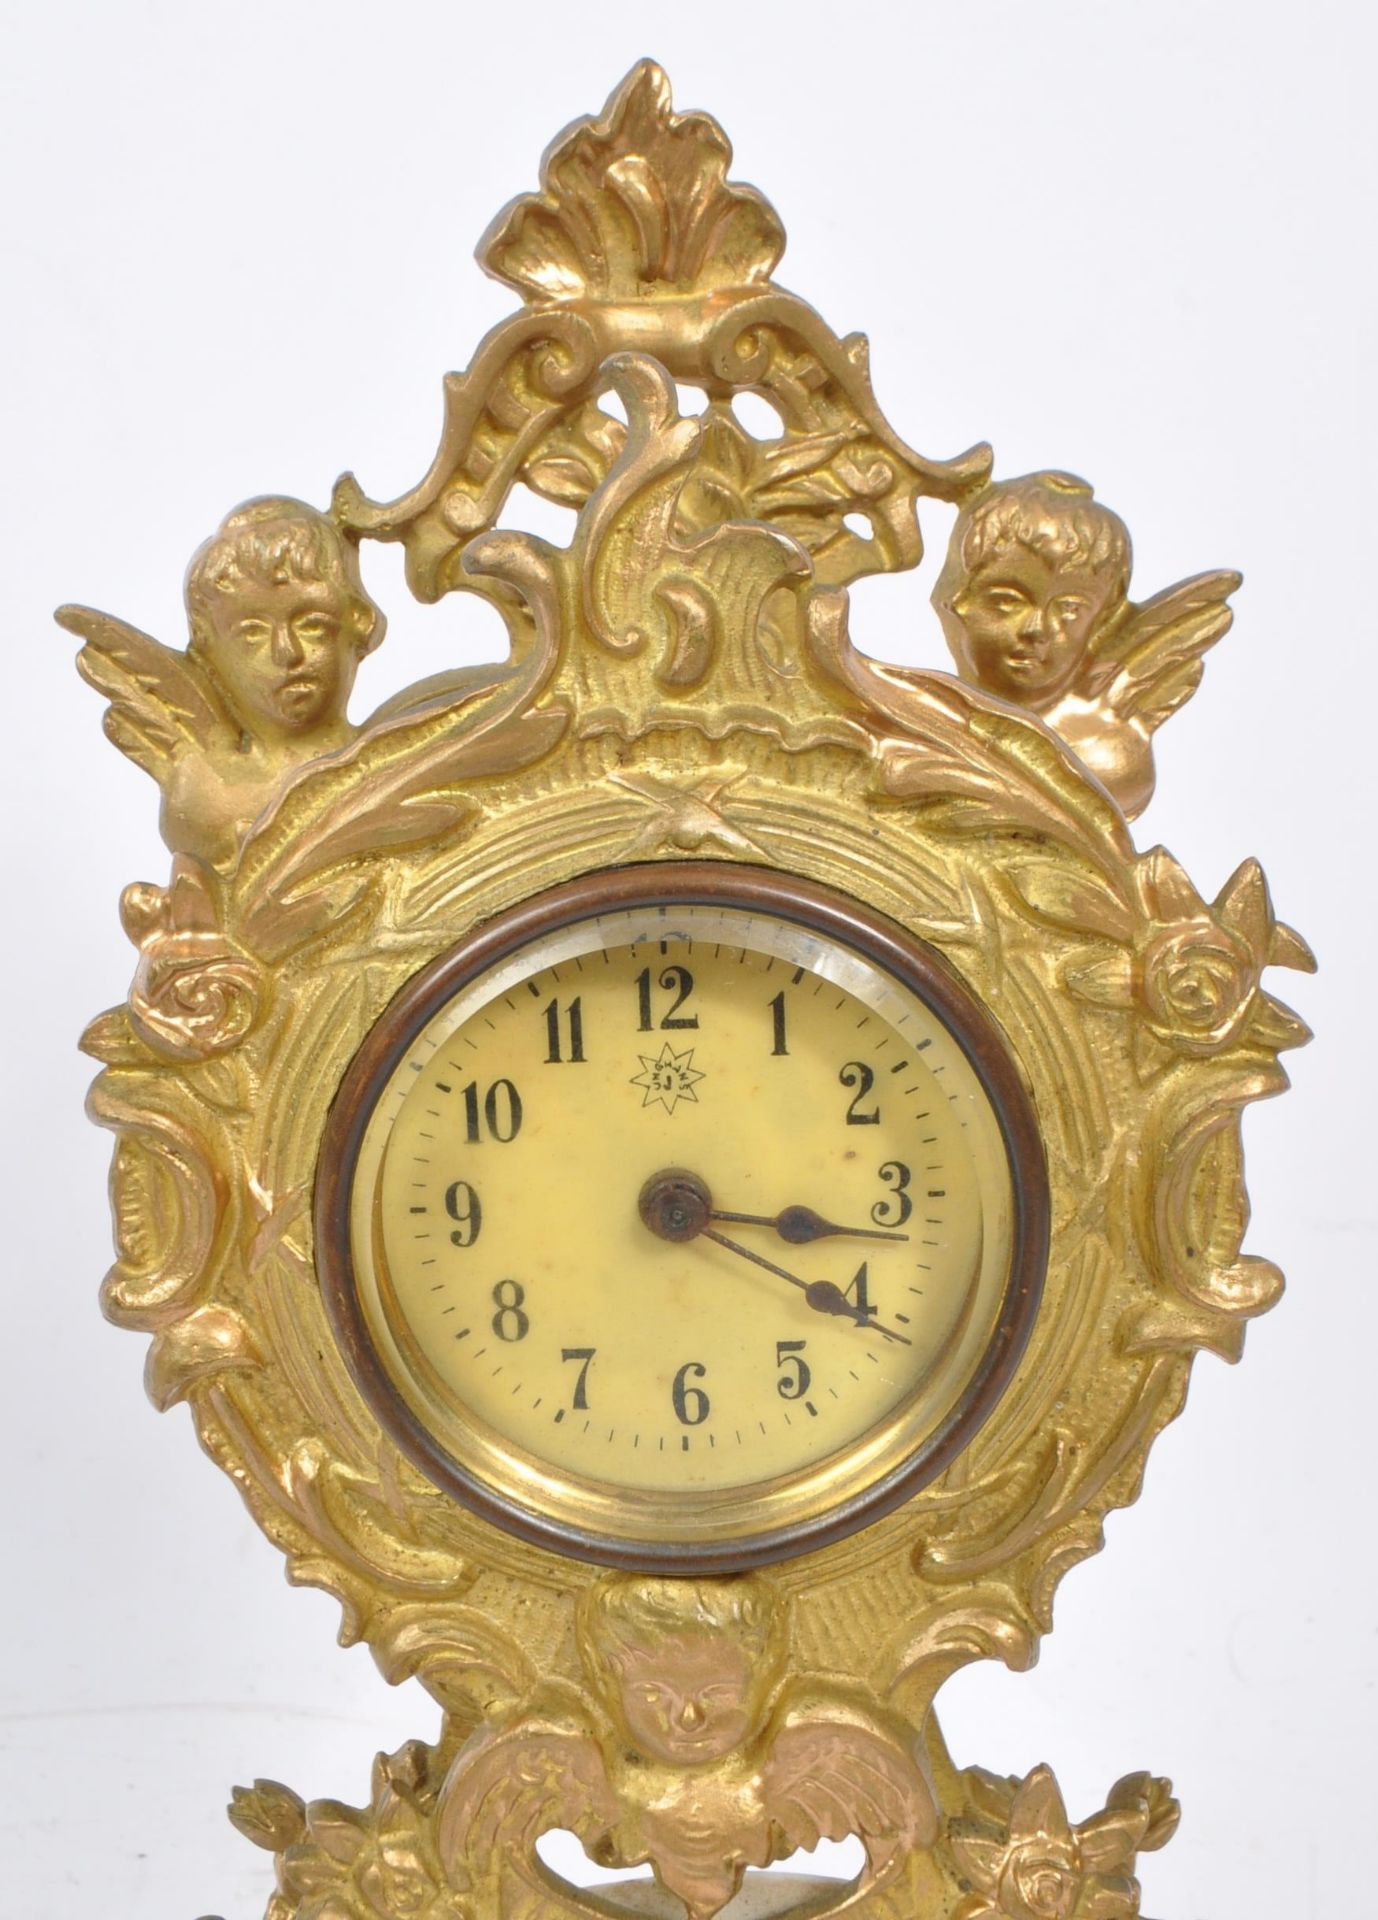 GILT METAL CONTINENTAL MANTEL CLOCK WITH COURTING SCENE - Image 3 of 6